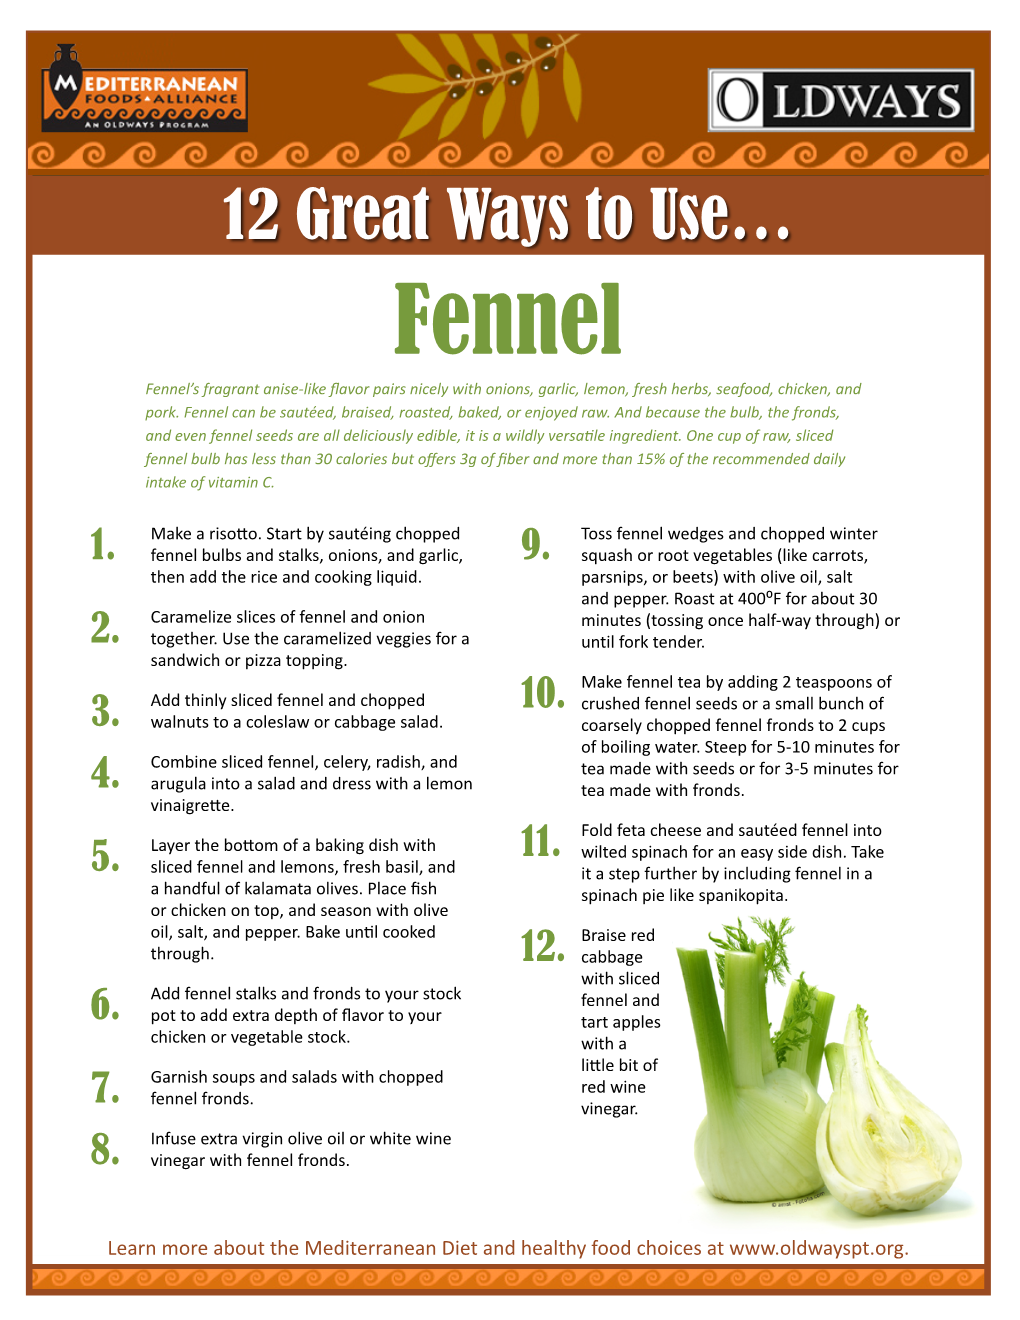 Fennel Fennel’S Fragrant Anise-Like Flavor Pairs Nicely with Onions, Garlic, Lemon, Fresh Herbs, Seafood, Chicken, and Pork